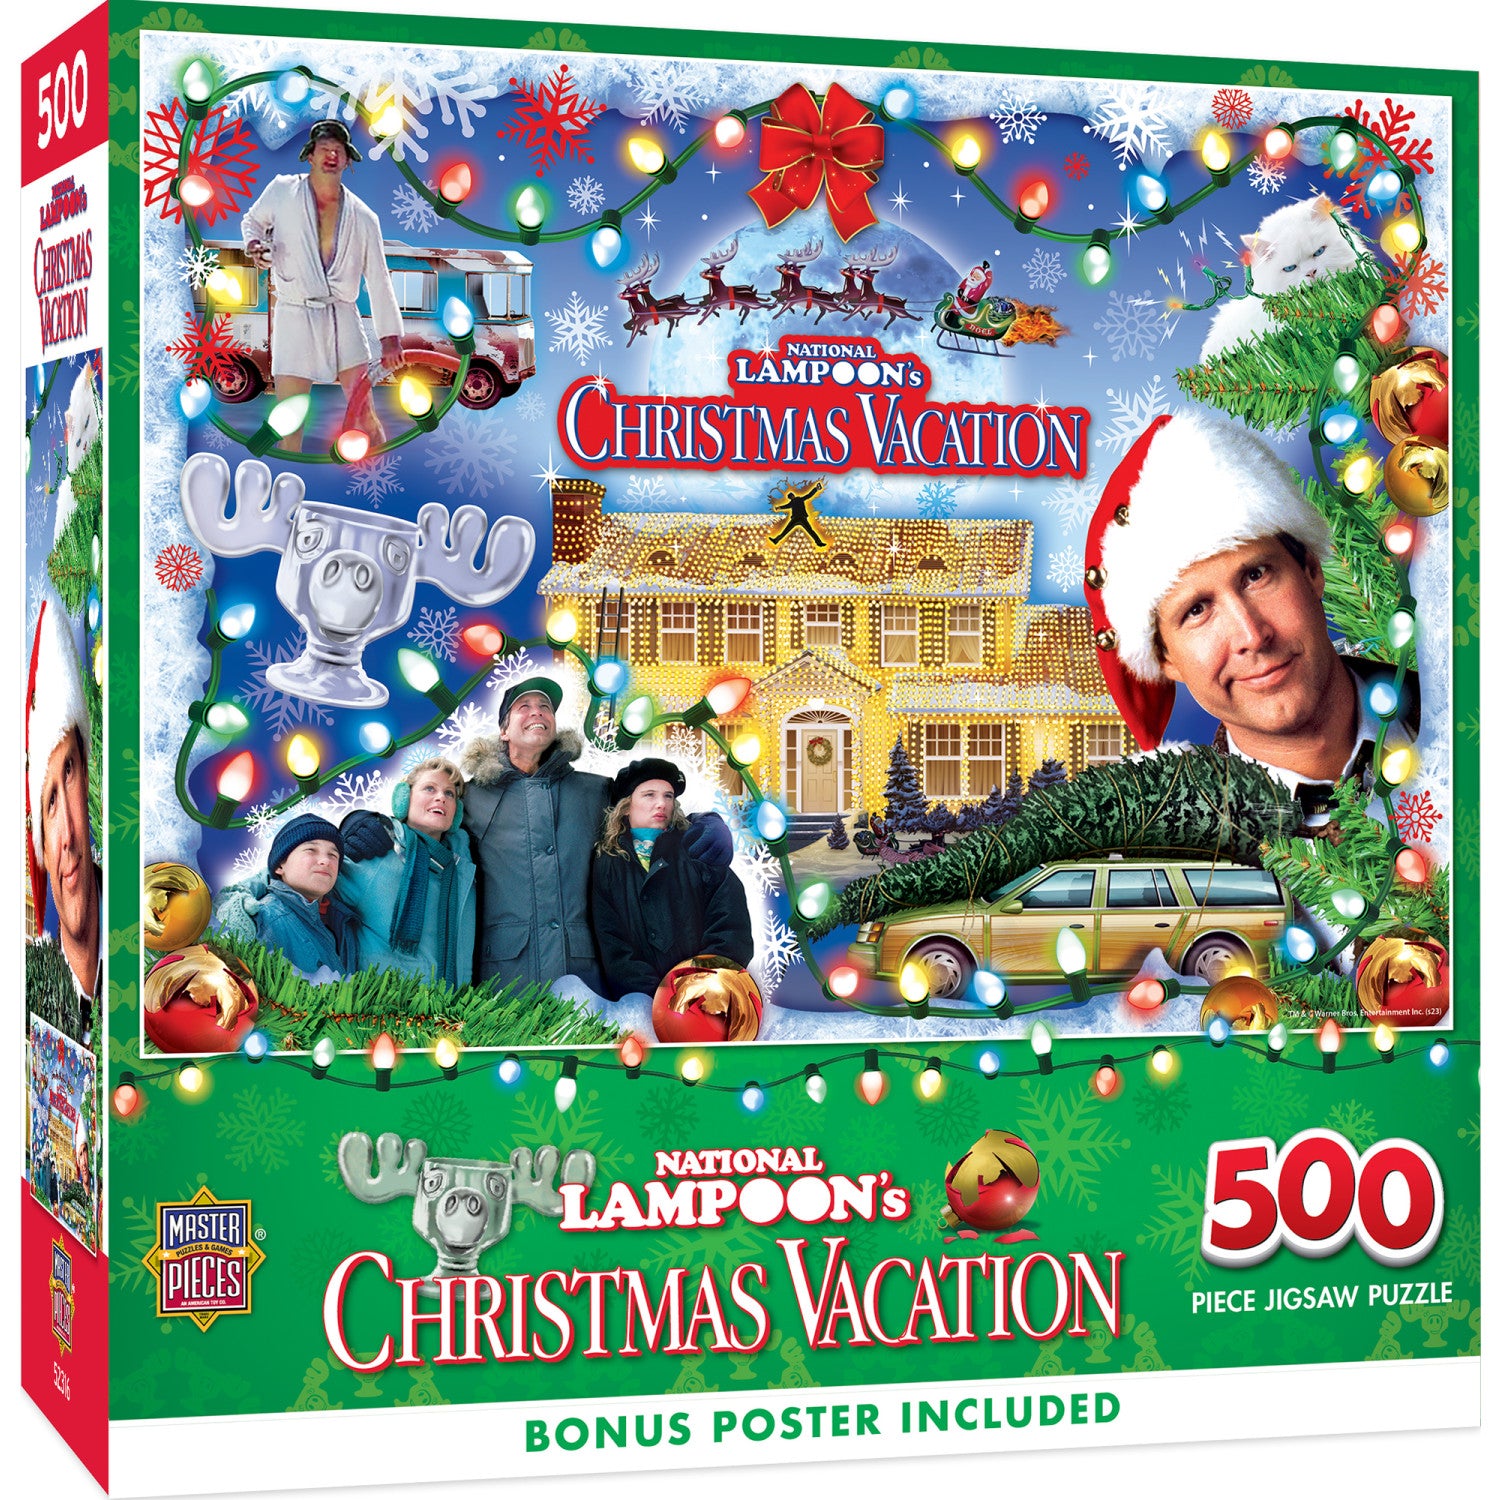 National Lampoon's Christmas Vacation - 500 Piece Jigsaw Puzzle